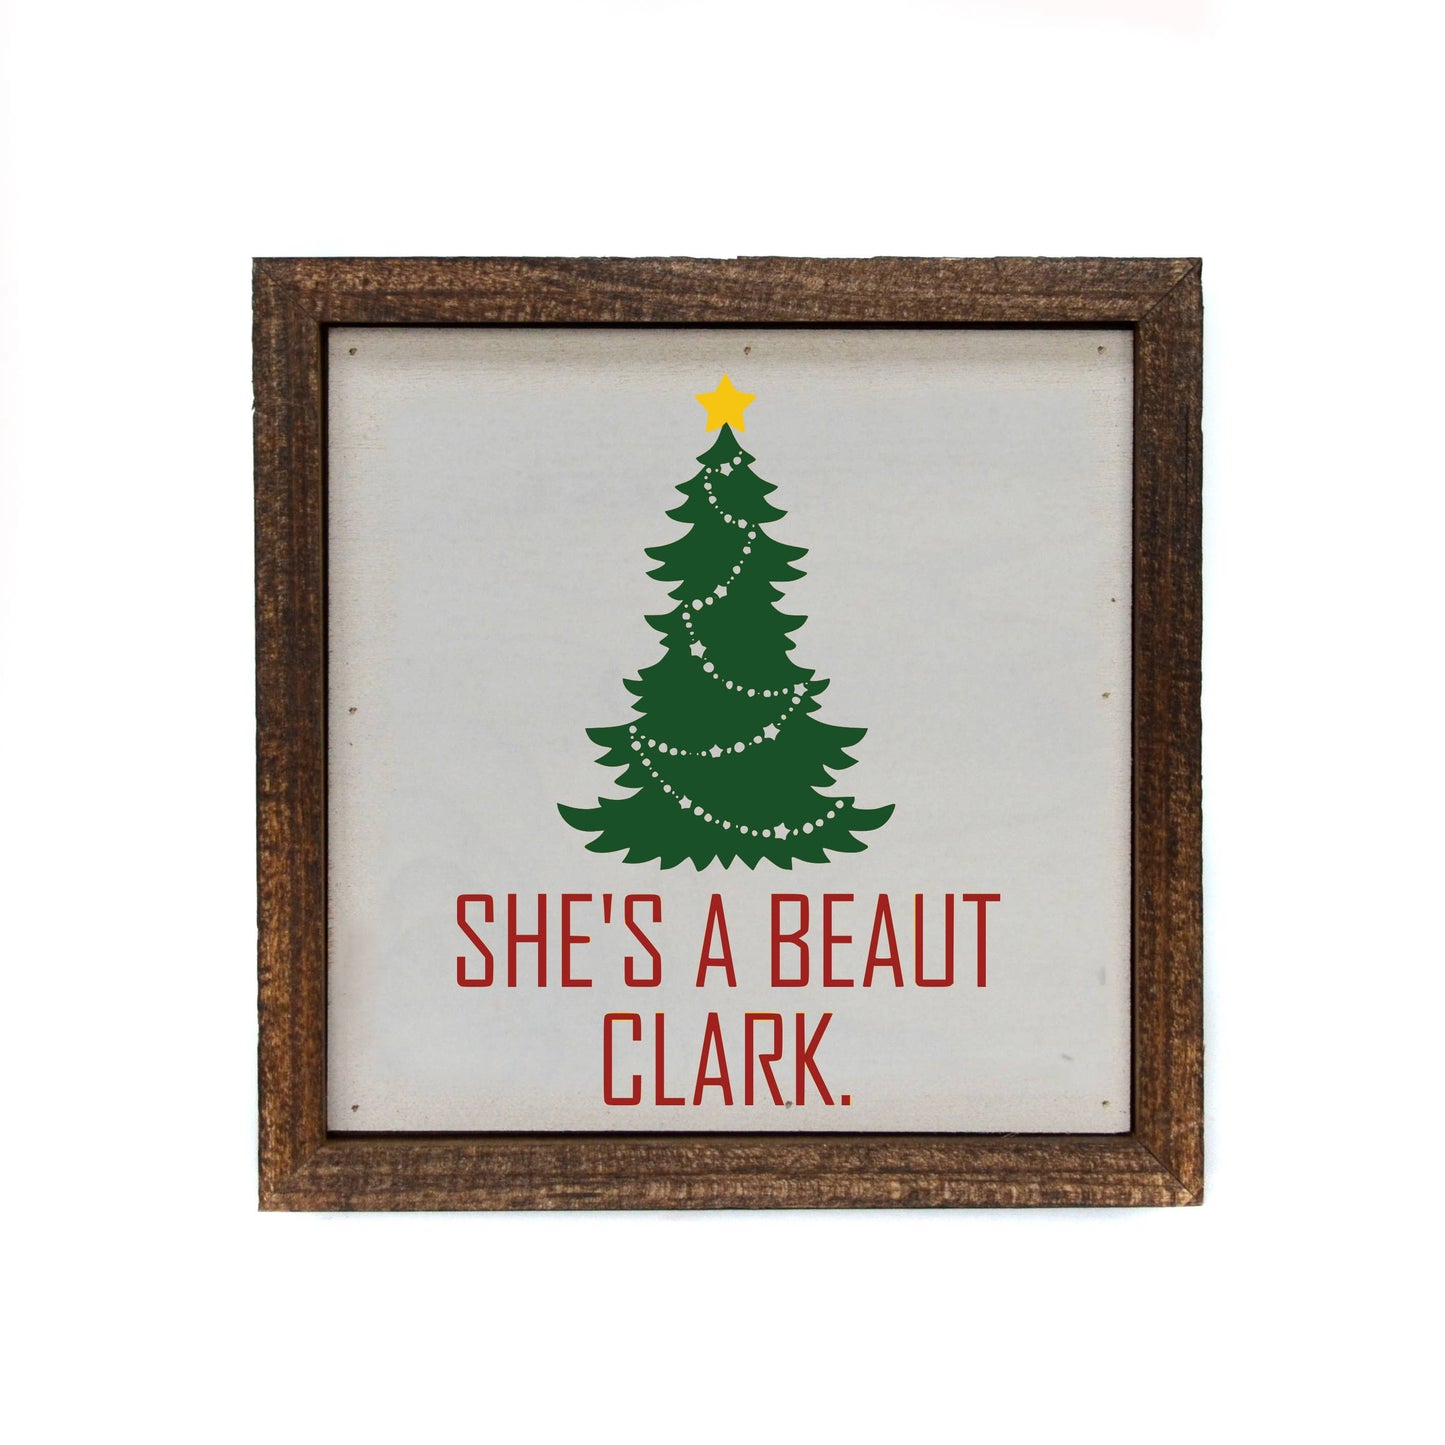 She's A Beaut Clark Christmas Vacation Themed Wooden Sign